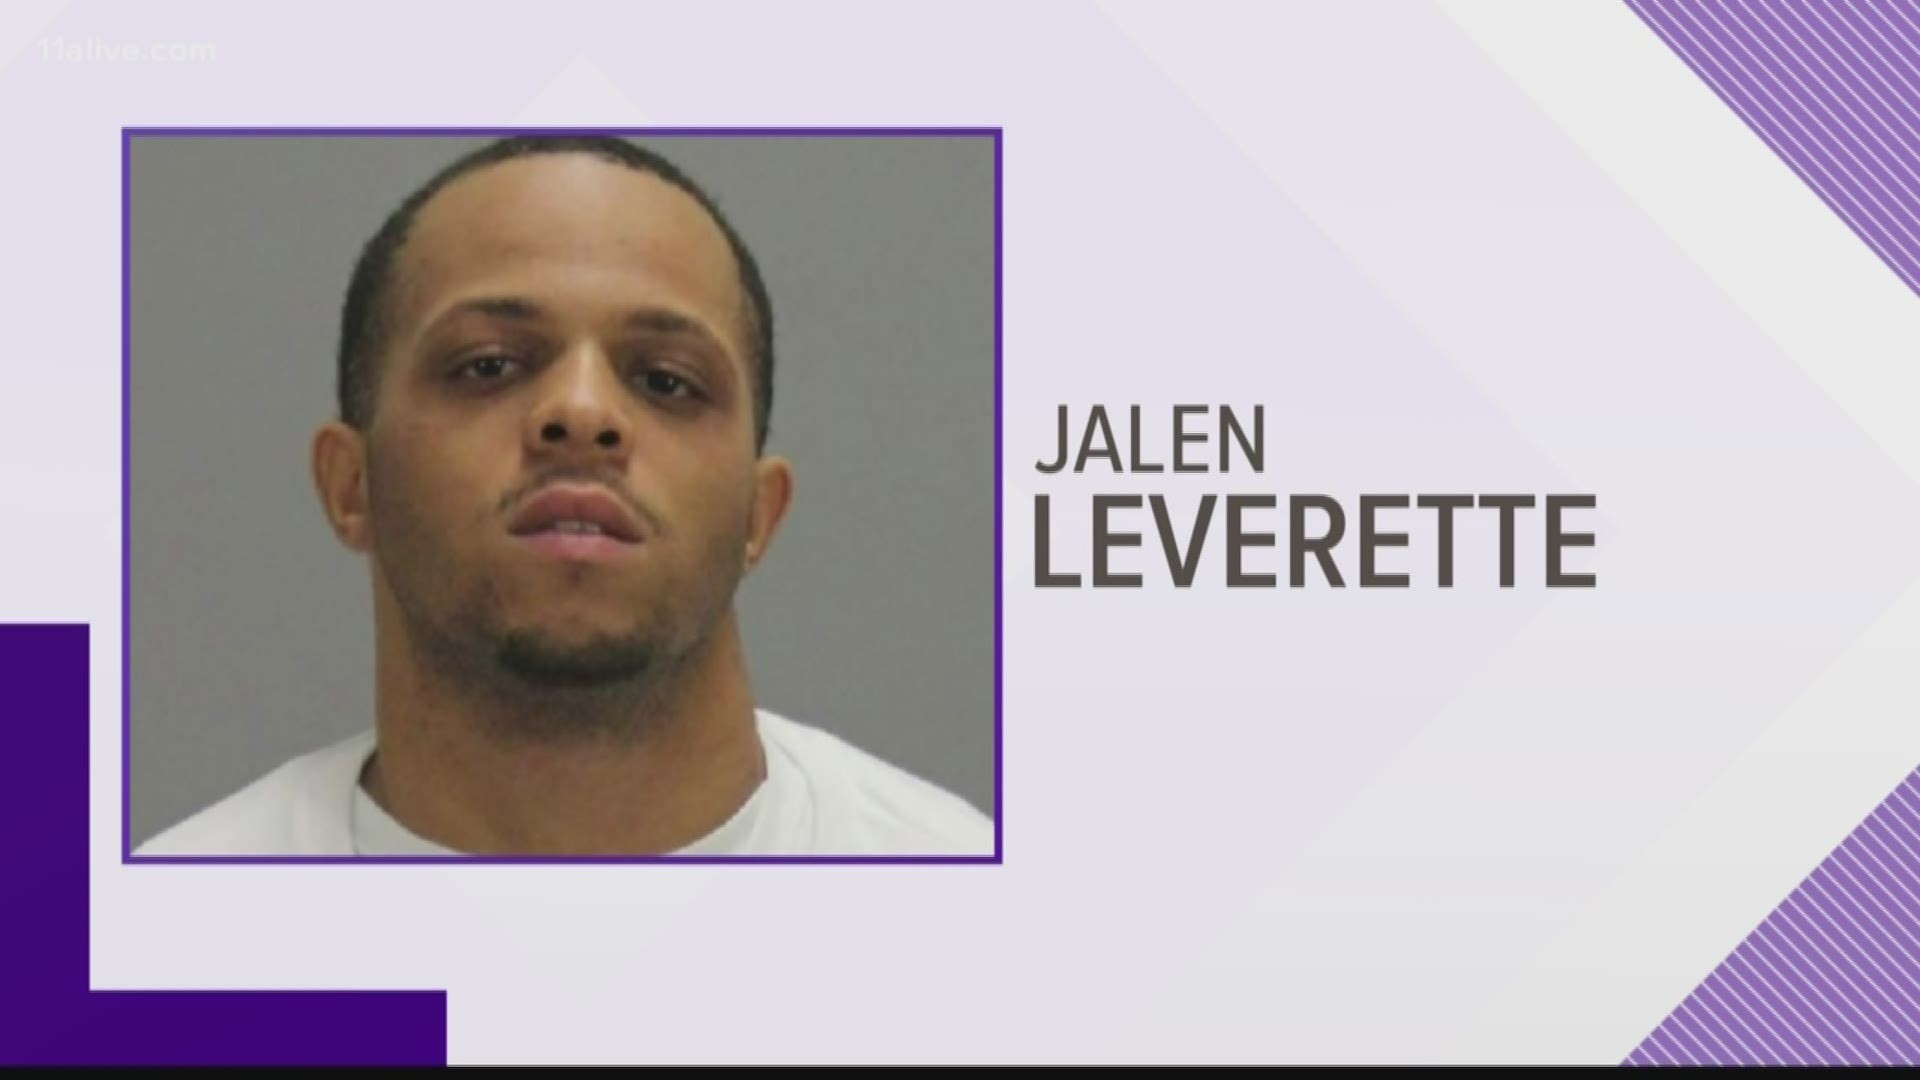 Clayton County Sheriff Victor Hill announced that Jalen Leverette surrendered himself to deputies on Monday night, Dec. 2.